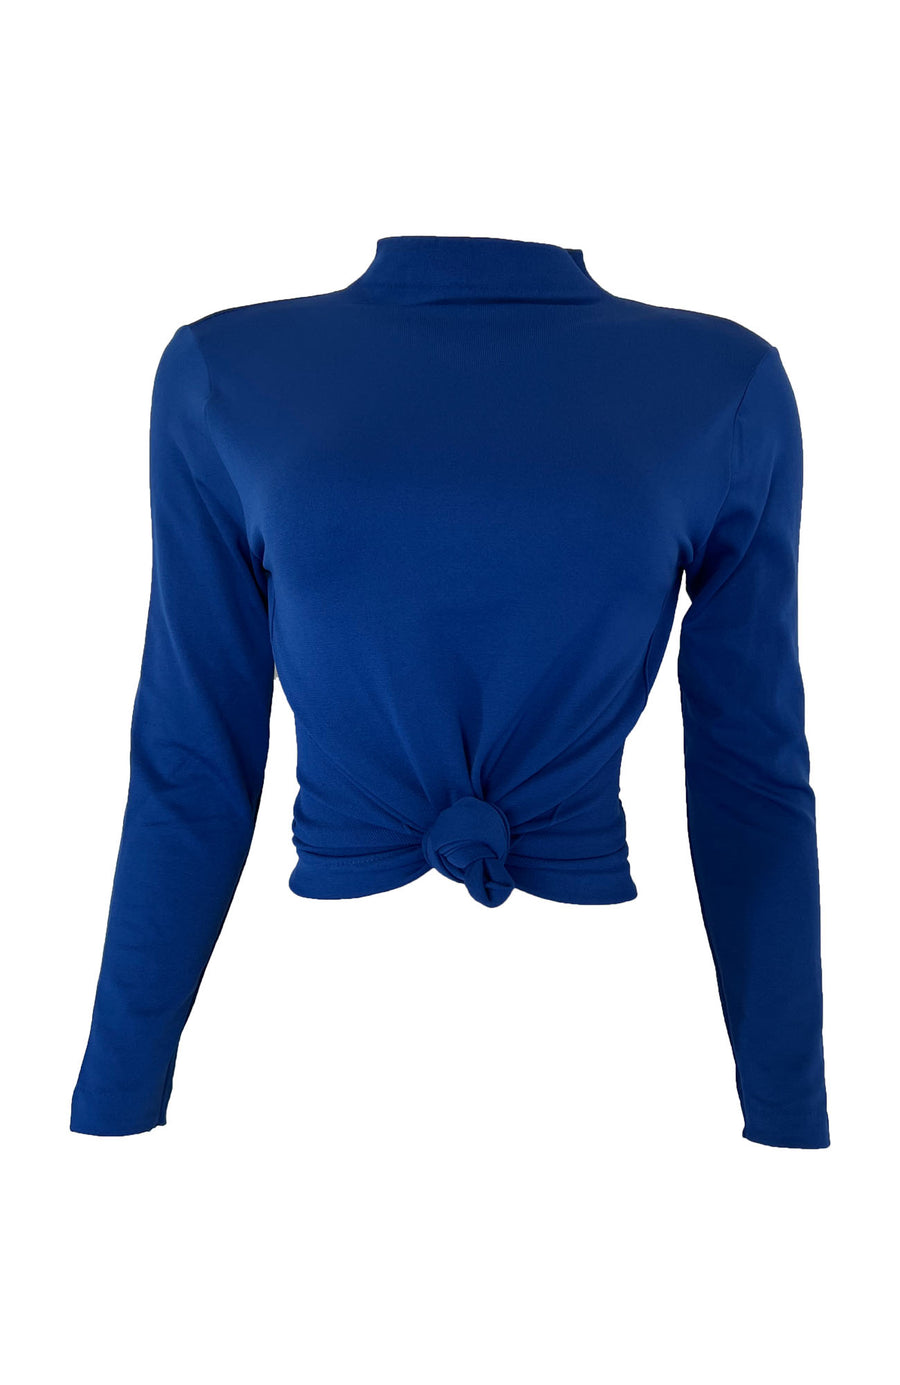 BABES TURTLENECK (avail in 12 colors)